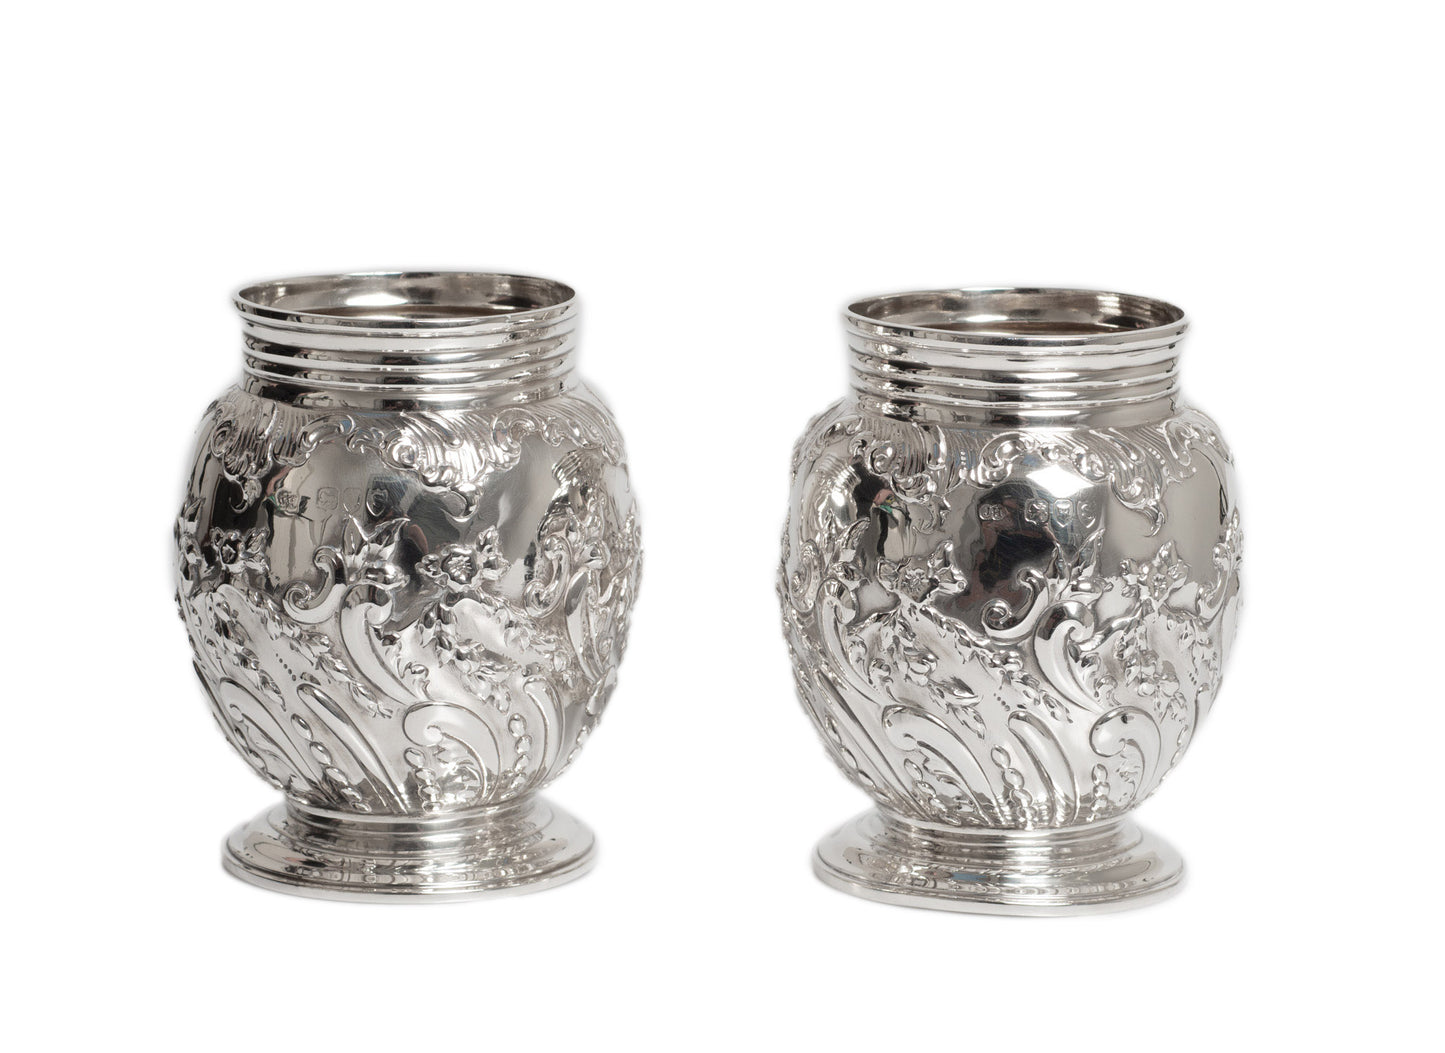 Pair Antique Victorian Sterling Silver Vases by Sibray, Hall & Co of Sheffield (Code 2764)